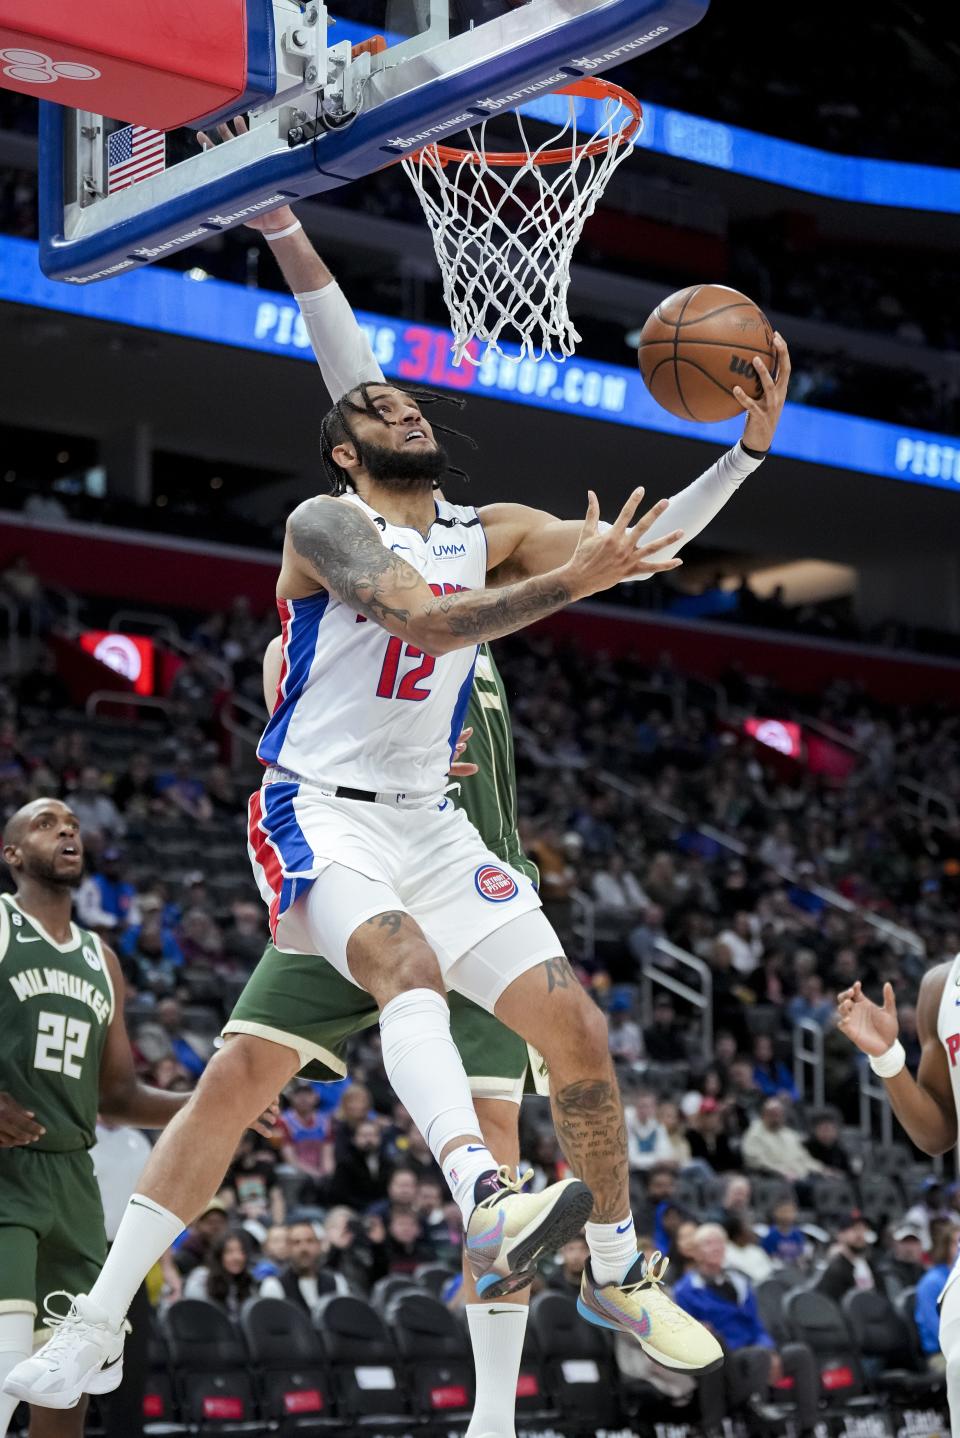 Pistons forward Isaiah Livers goes up for a shot against Bucks center Brook Lopez in the first half on Monday, March 27, 2023, at Little Caesars Arena.